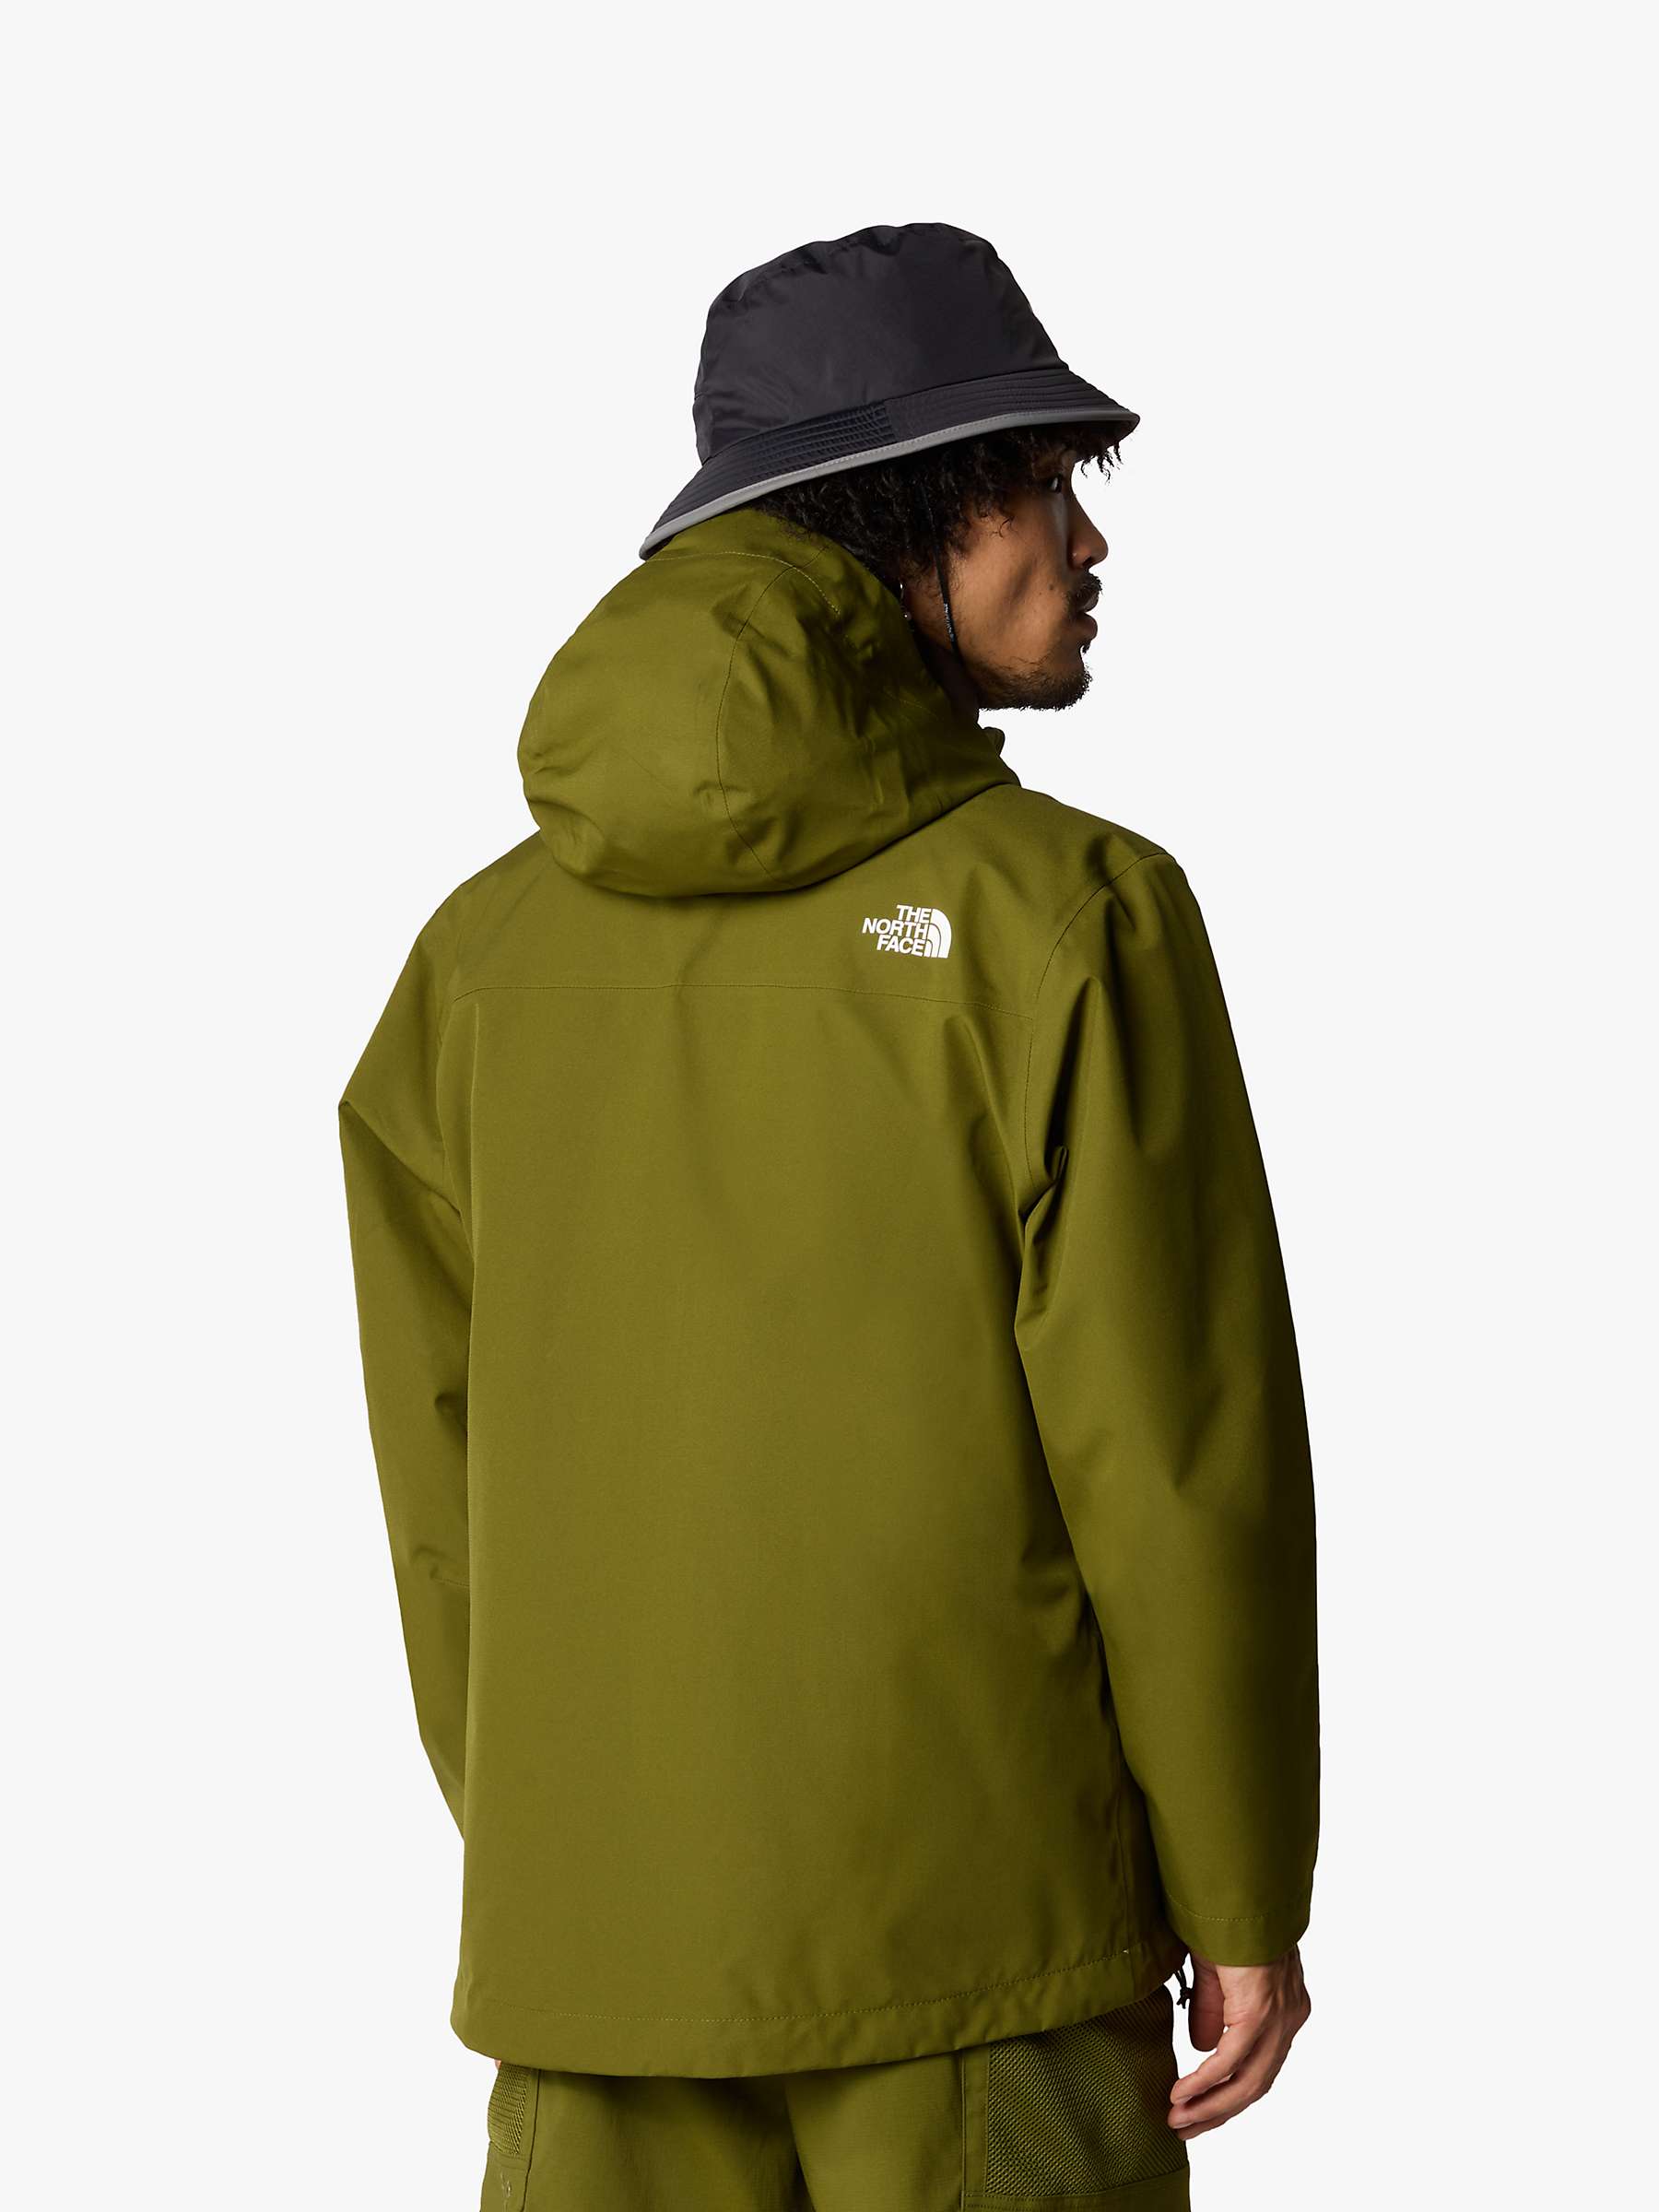 Buy The North Face Whiton Waterproof Jacket, Forest Olive Online at johnlewis.com